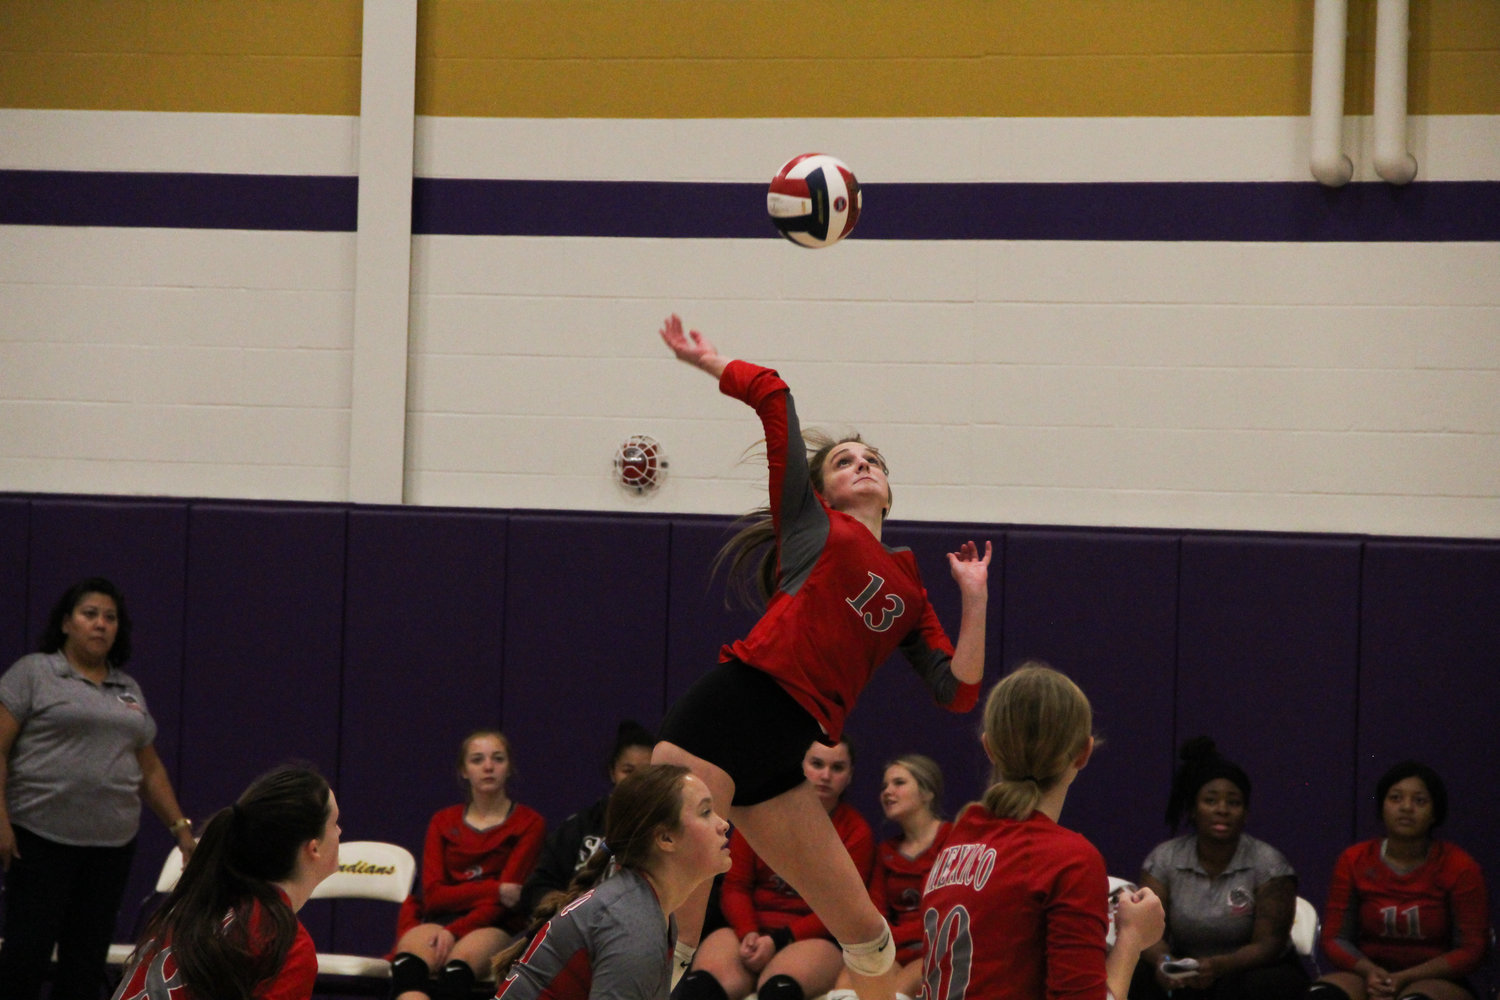 Mexico senior outside hitter Jessica Stephens jumps up for a swing Thursday against Bowling Green in the Class 3 District 7 Tournament in Hallsville. The Lady Bulldogs' season was cut short, but Stephens along with two others from Mexico were named to the all-district team. Stephens was also announced as a first team all-conference selection while senior setter Ally Wilson was named as an honorable mention.